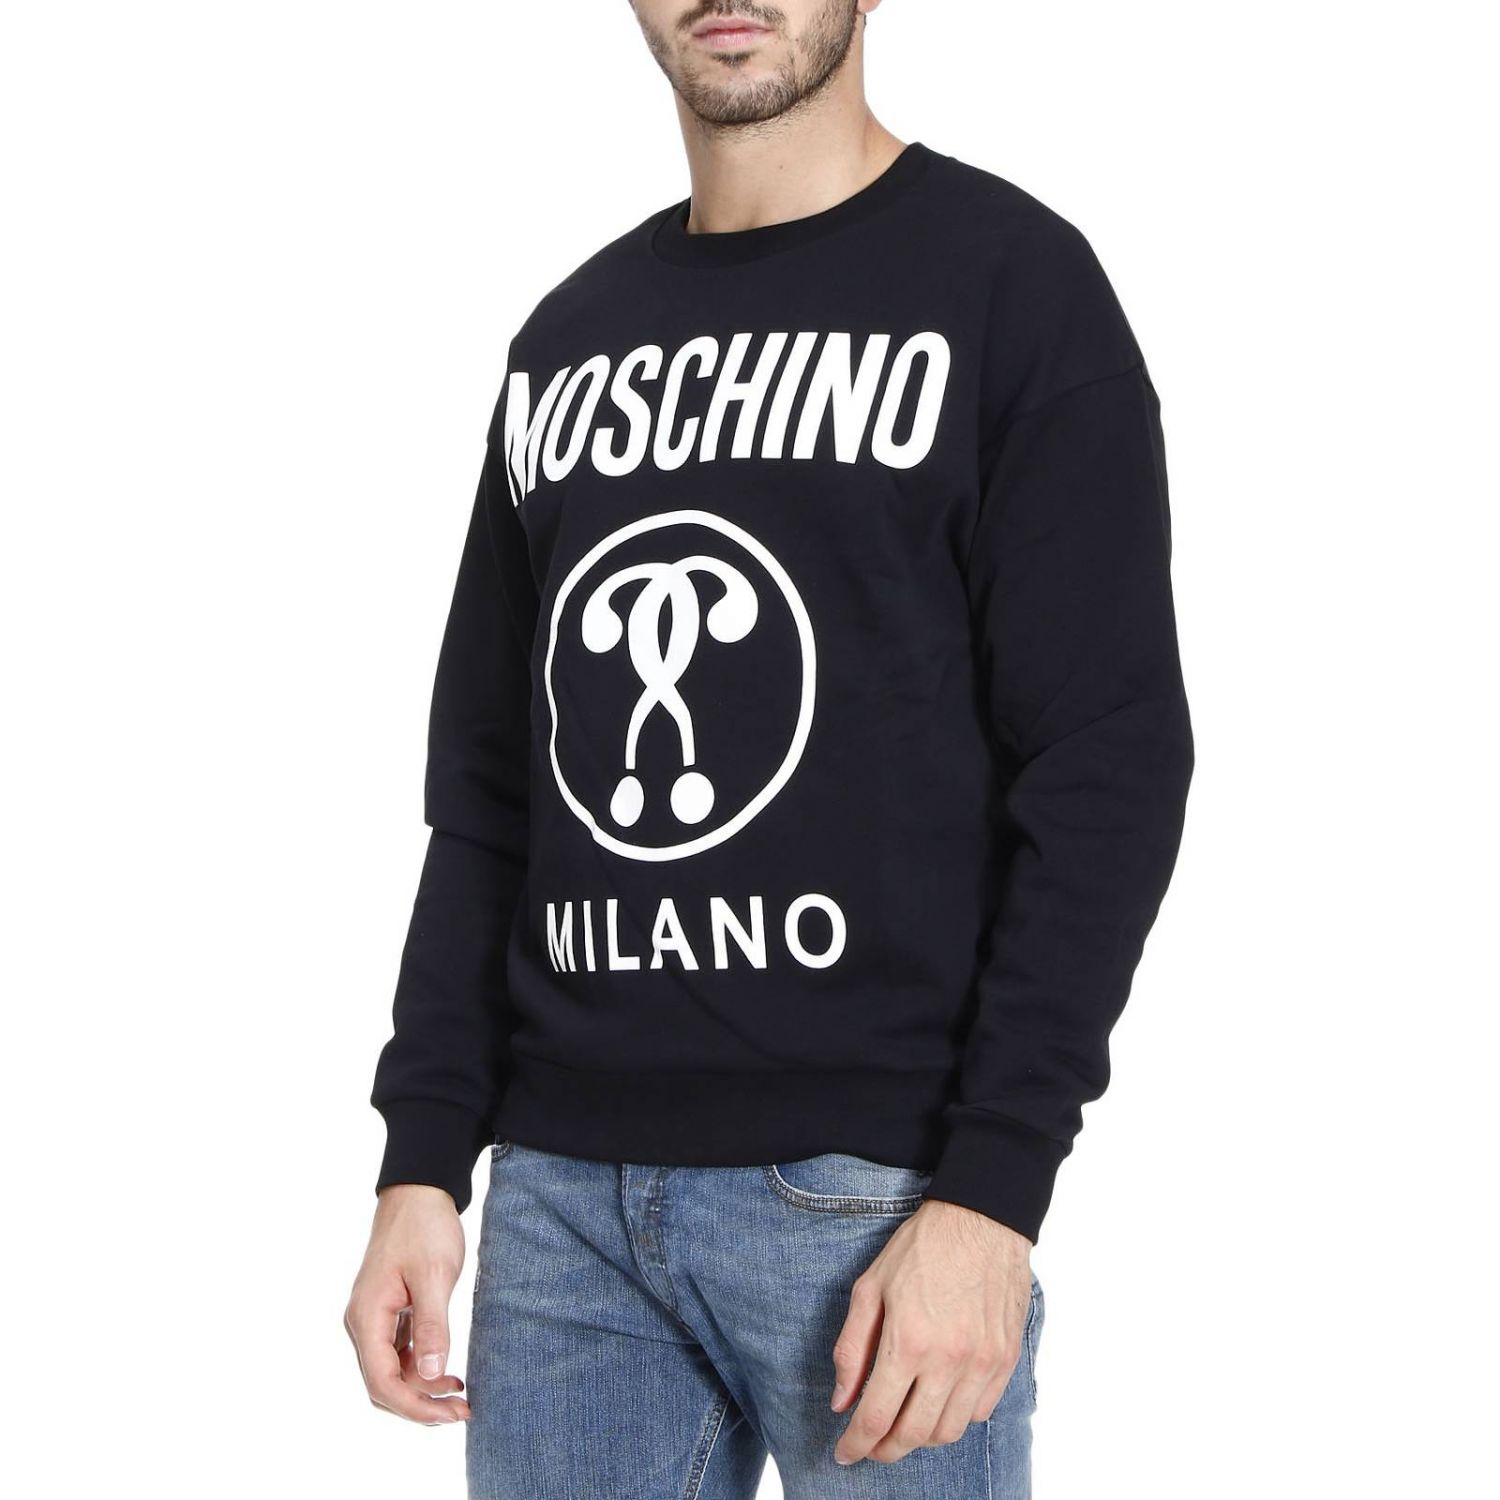 Moschino Couture Outlet: Sweater men | Sweatshirt Moschino Couture Men